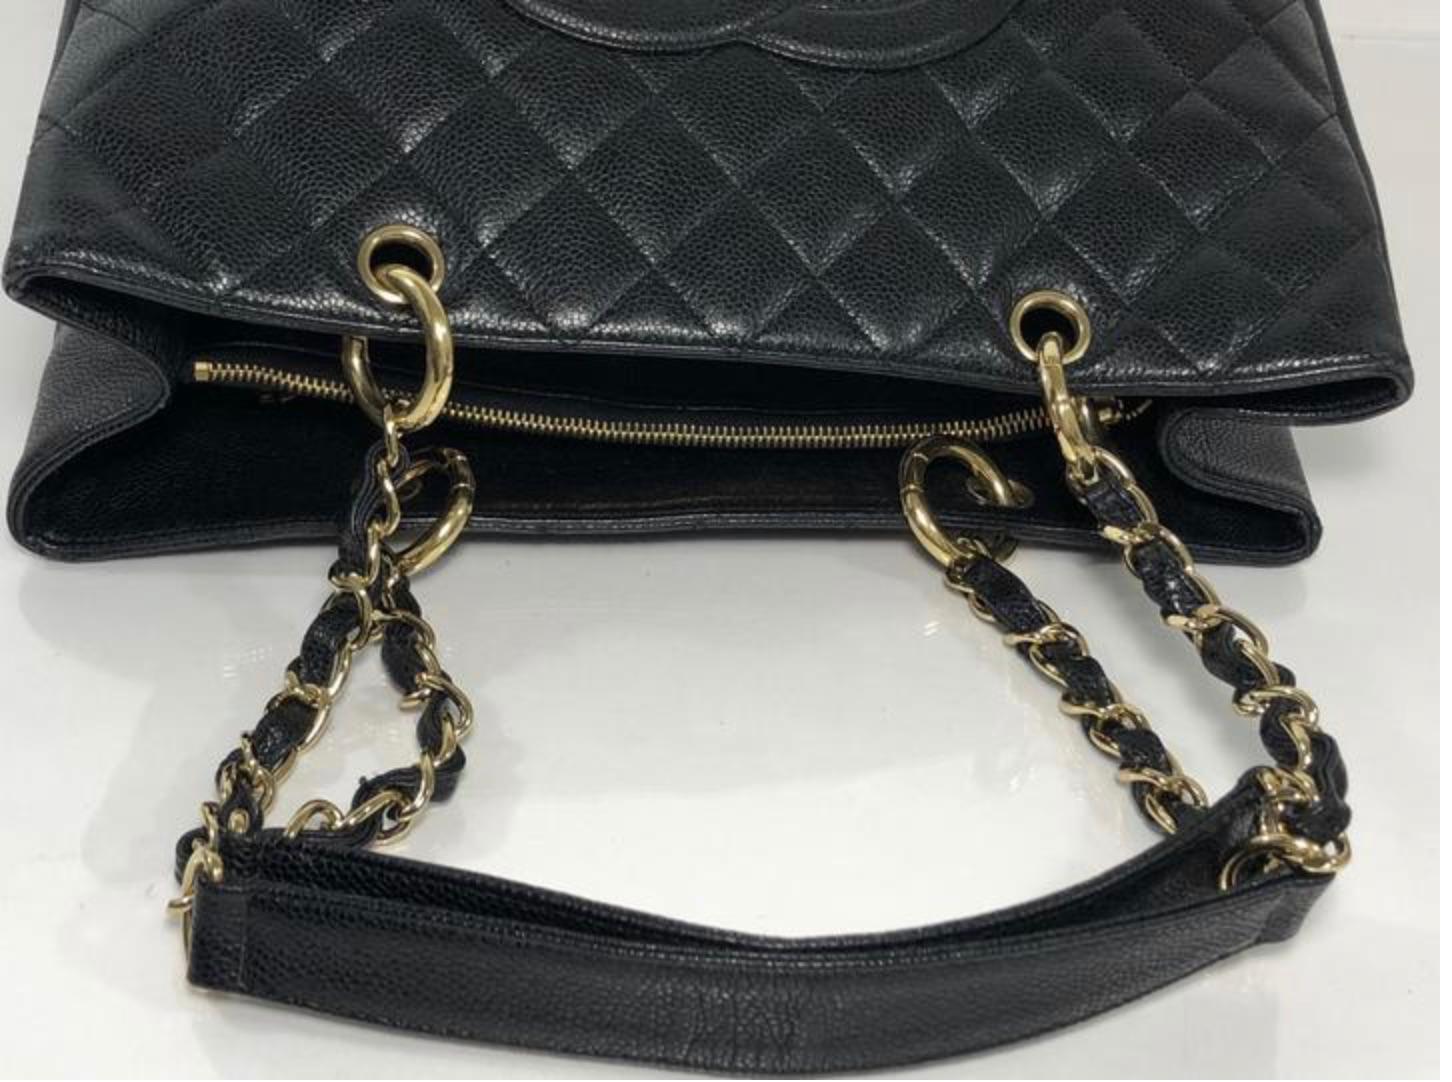 Chanel Caviar Leather Grand Shopping Tote w Gold Hardware in Black Shoulder Bag For Sale 2